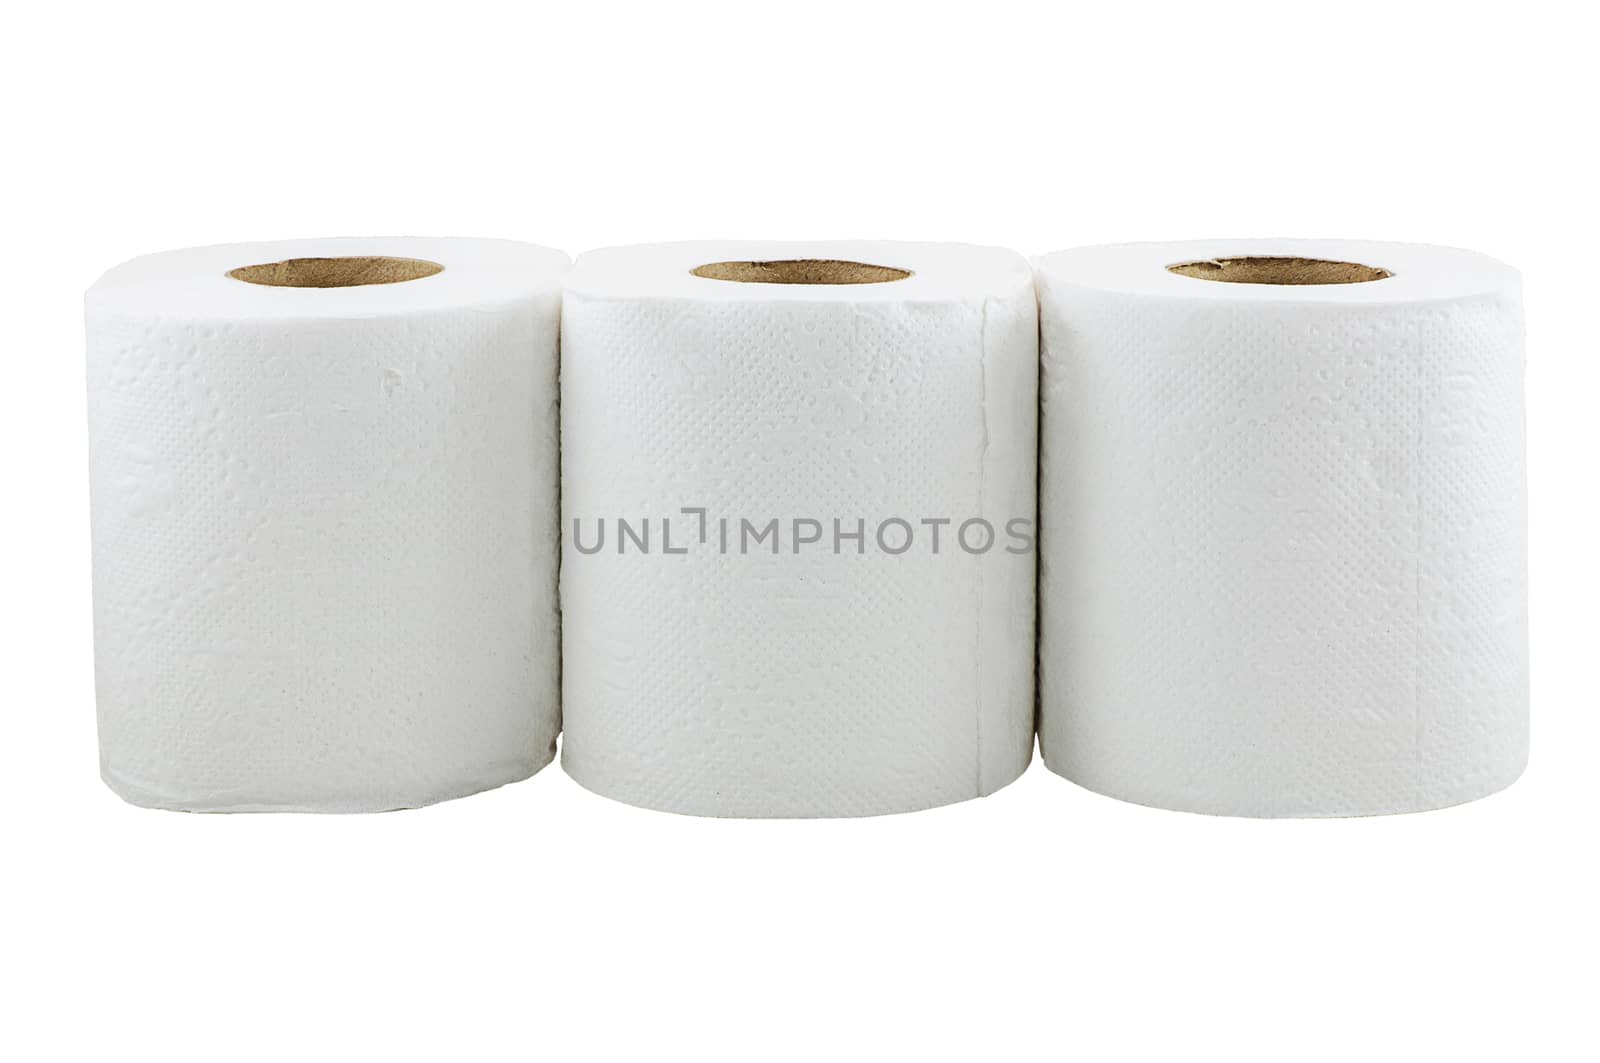 Toilet paper isolated on a white background with clipping path